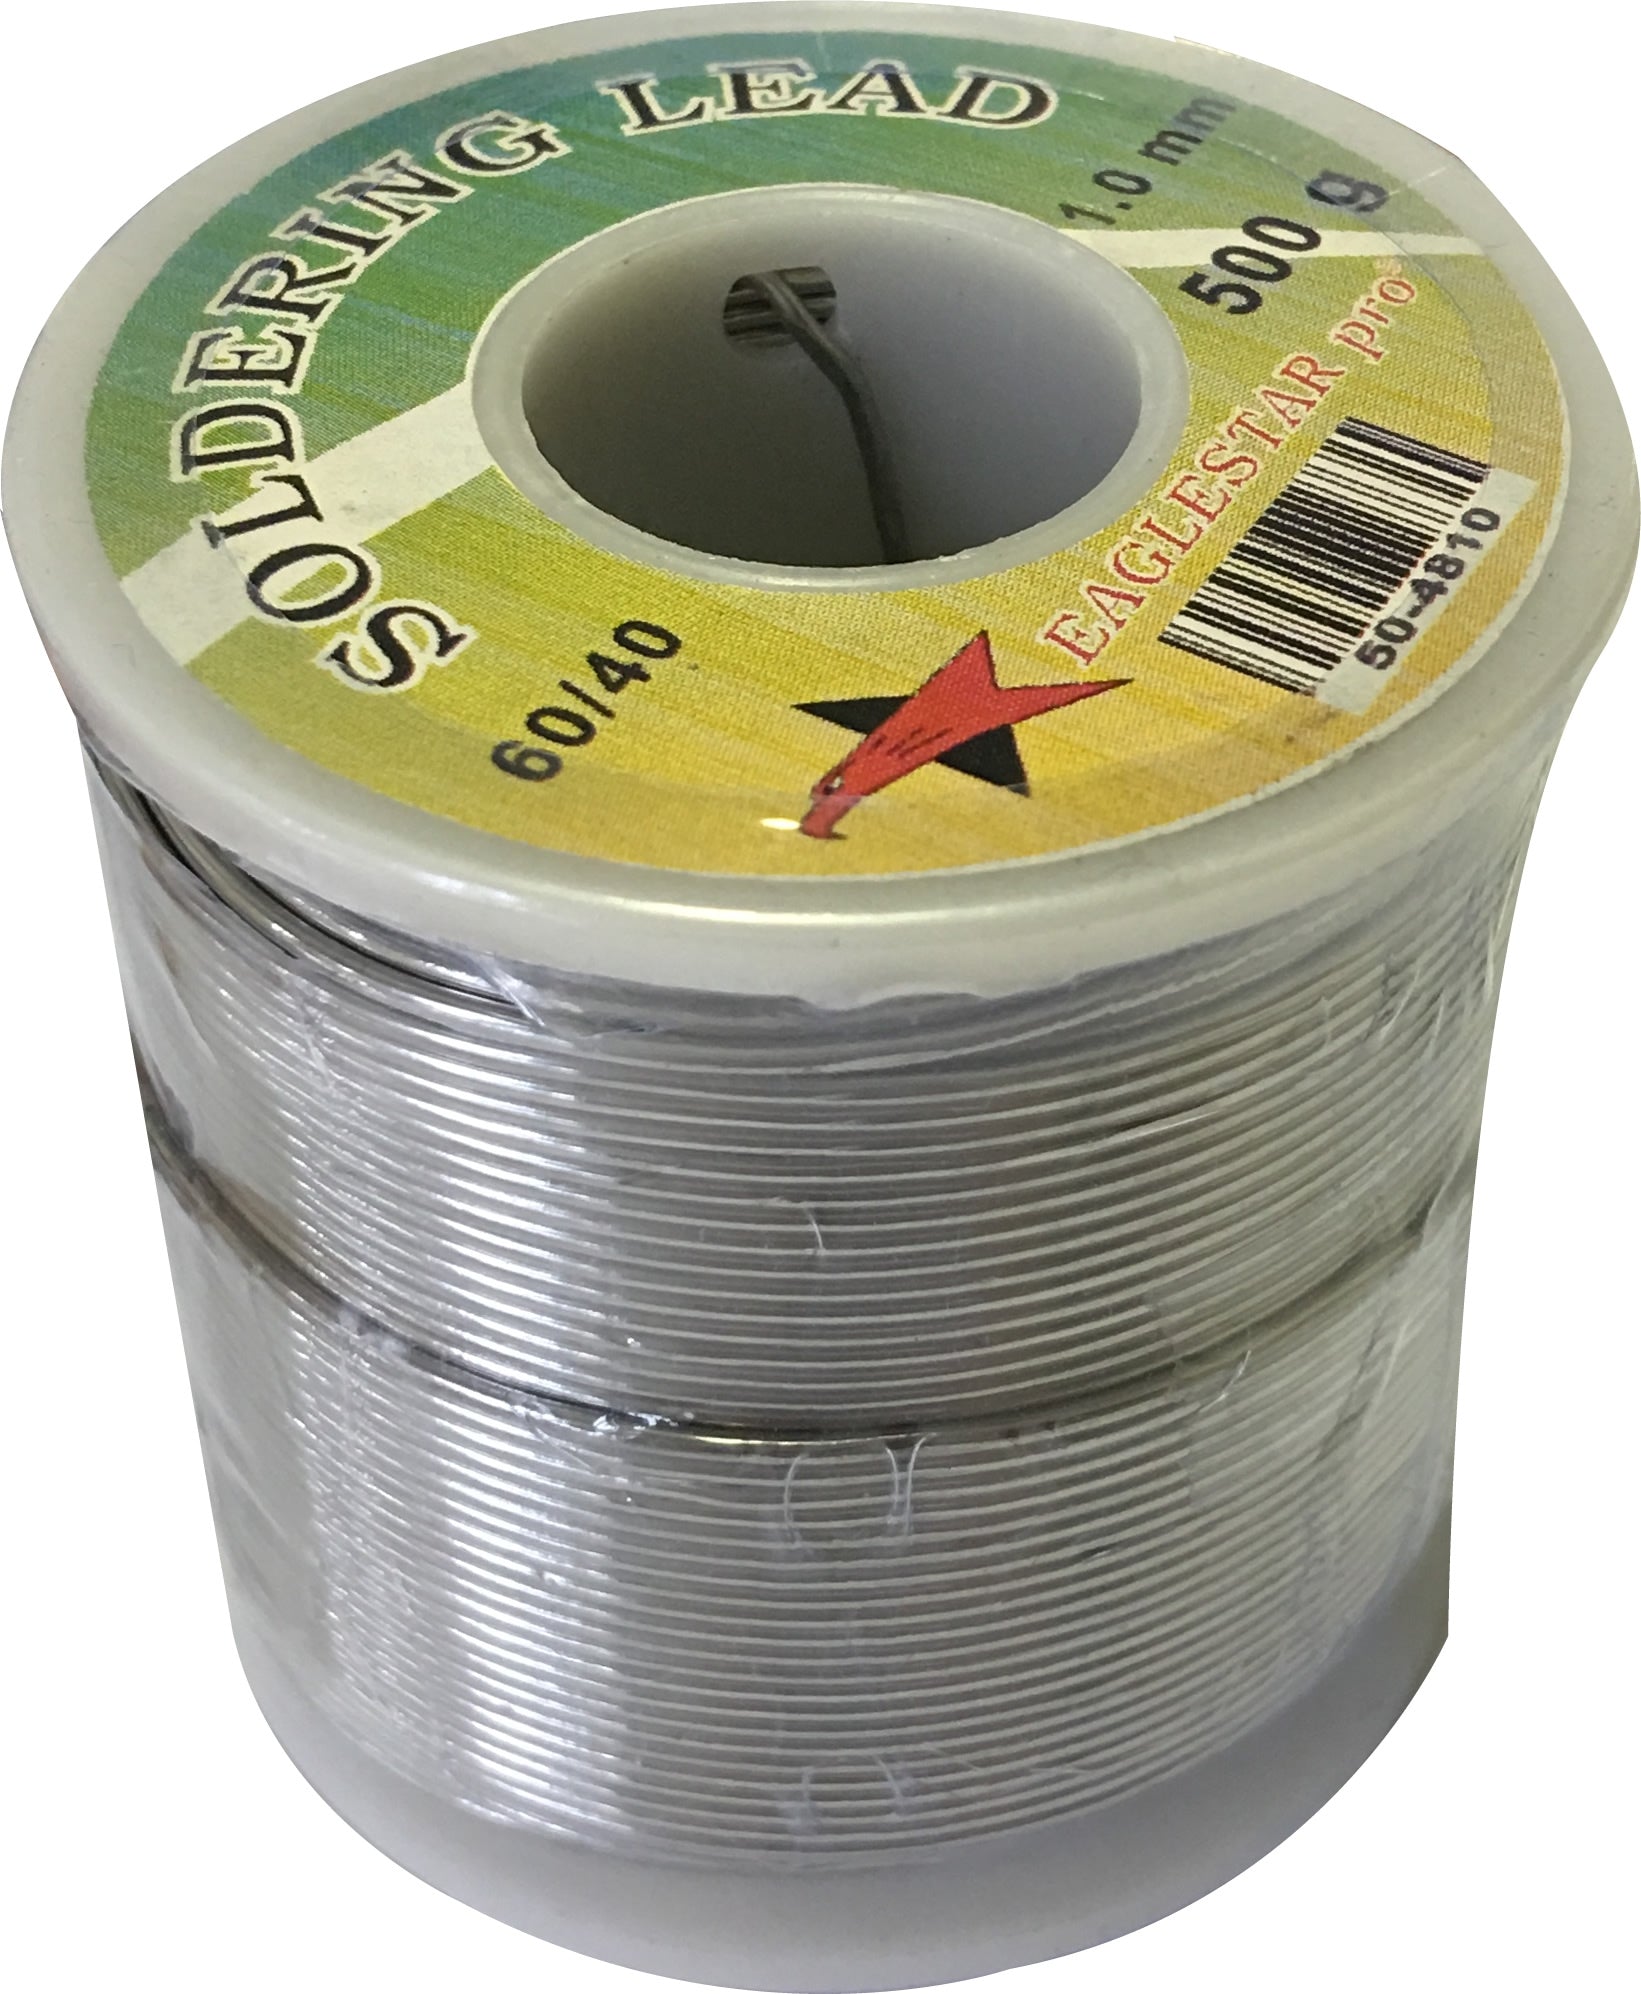 50-4810 Soldering Wire Roll Size 1mm 500g 60%Sn